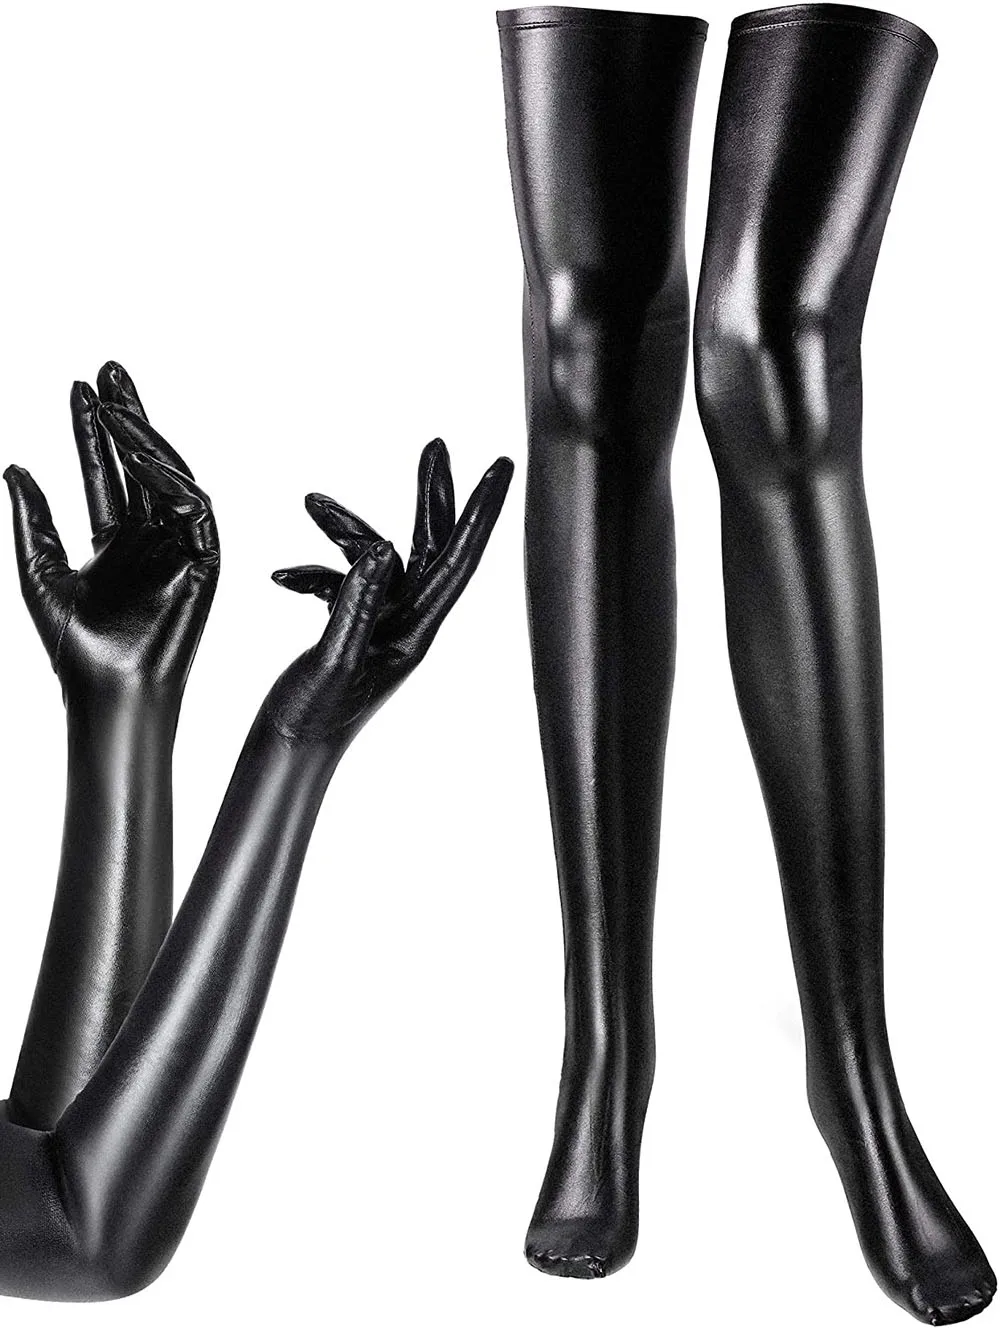 

Women's Costume Set Elastic Spandex Shiny Wet Long Gloves and Wet Look Thigh High Stockings